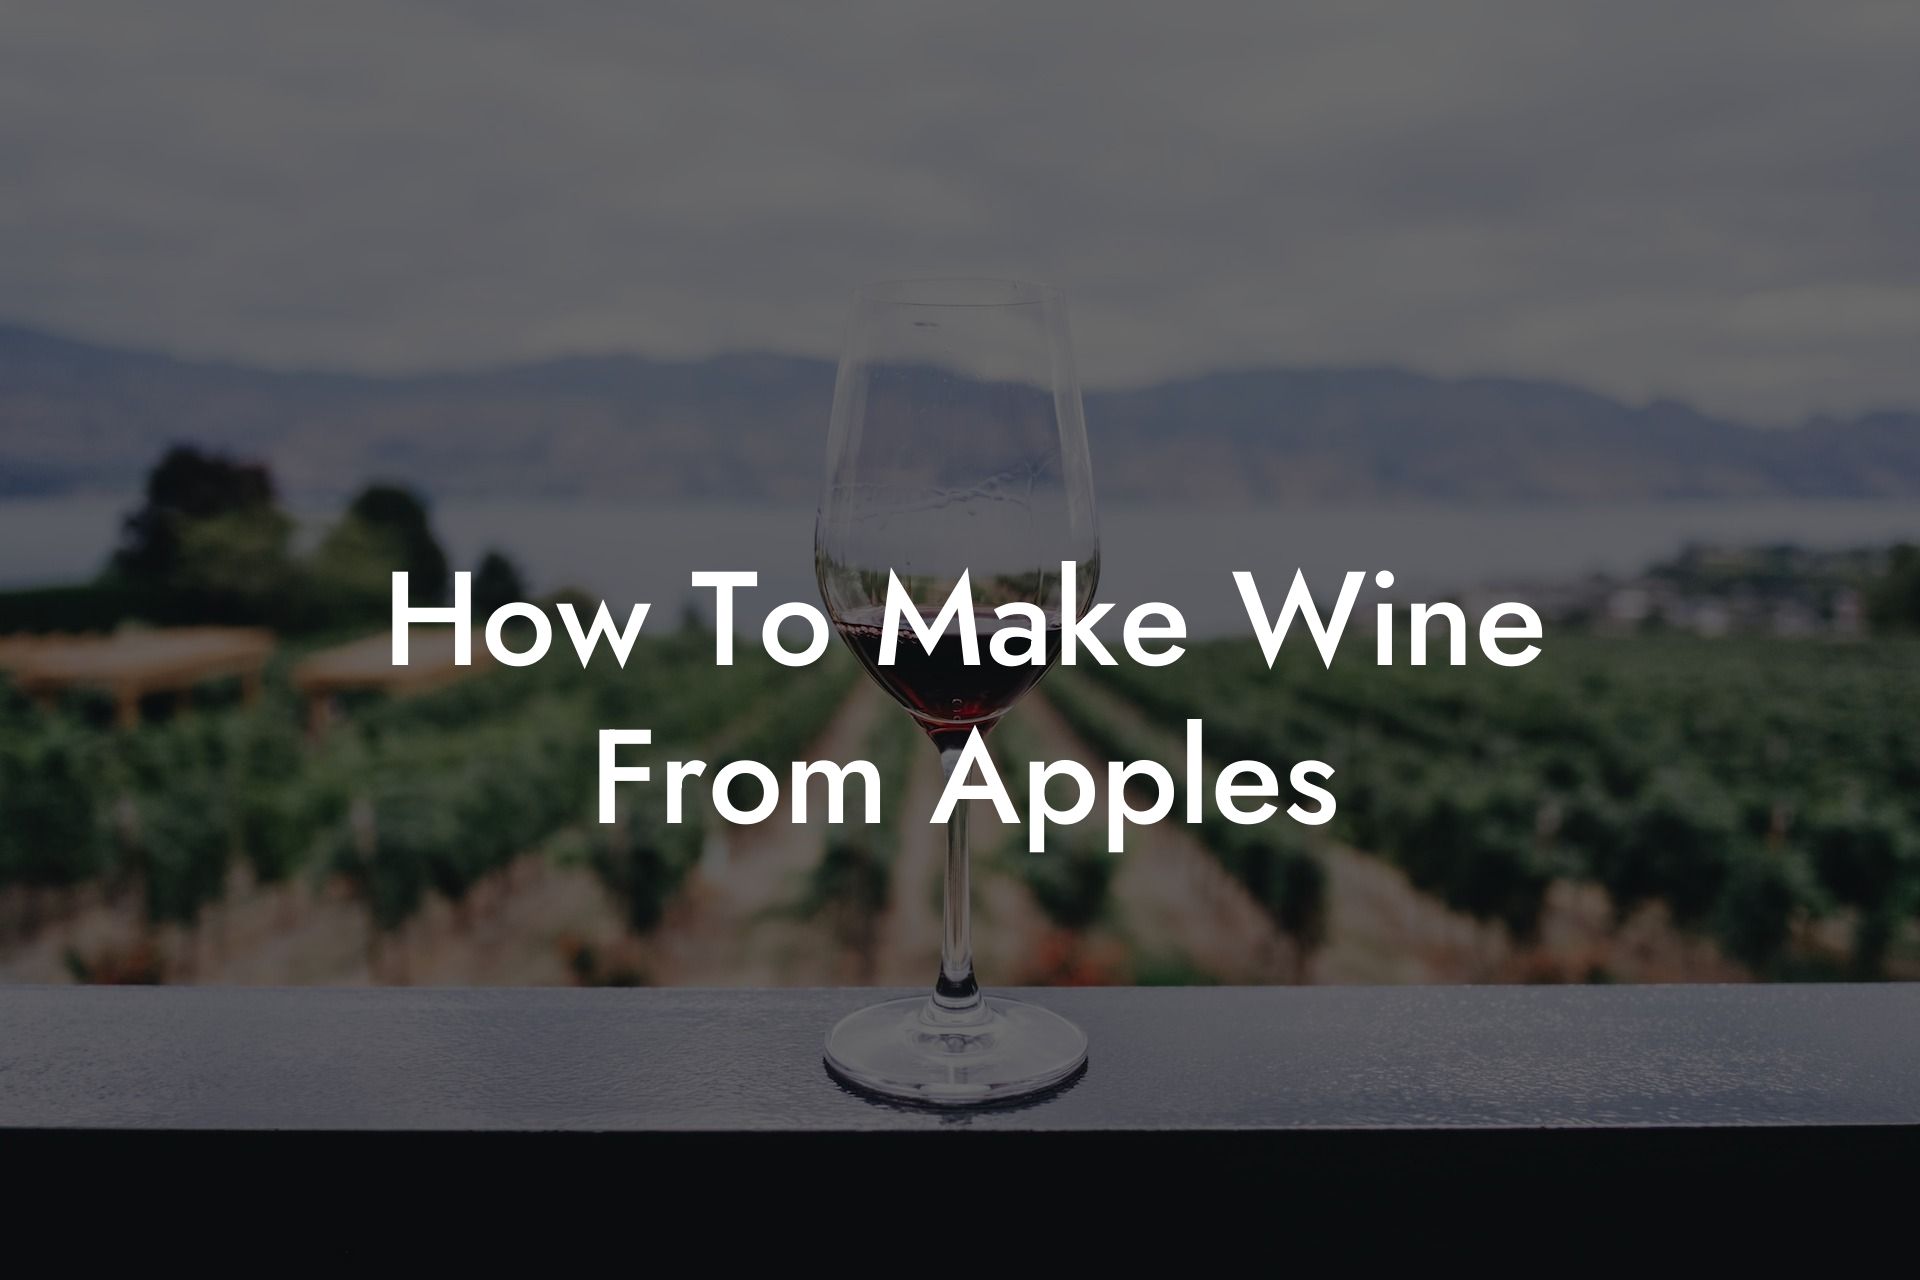 How To Make Wine From Apples